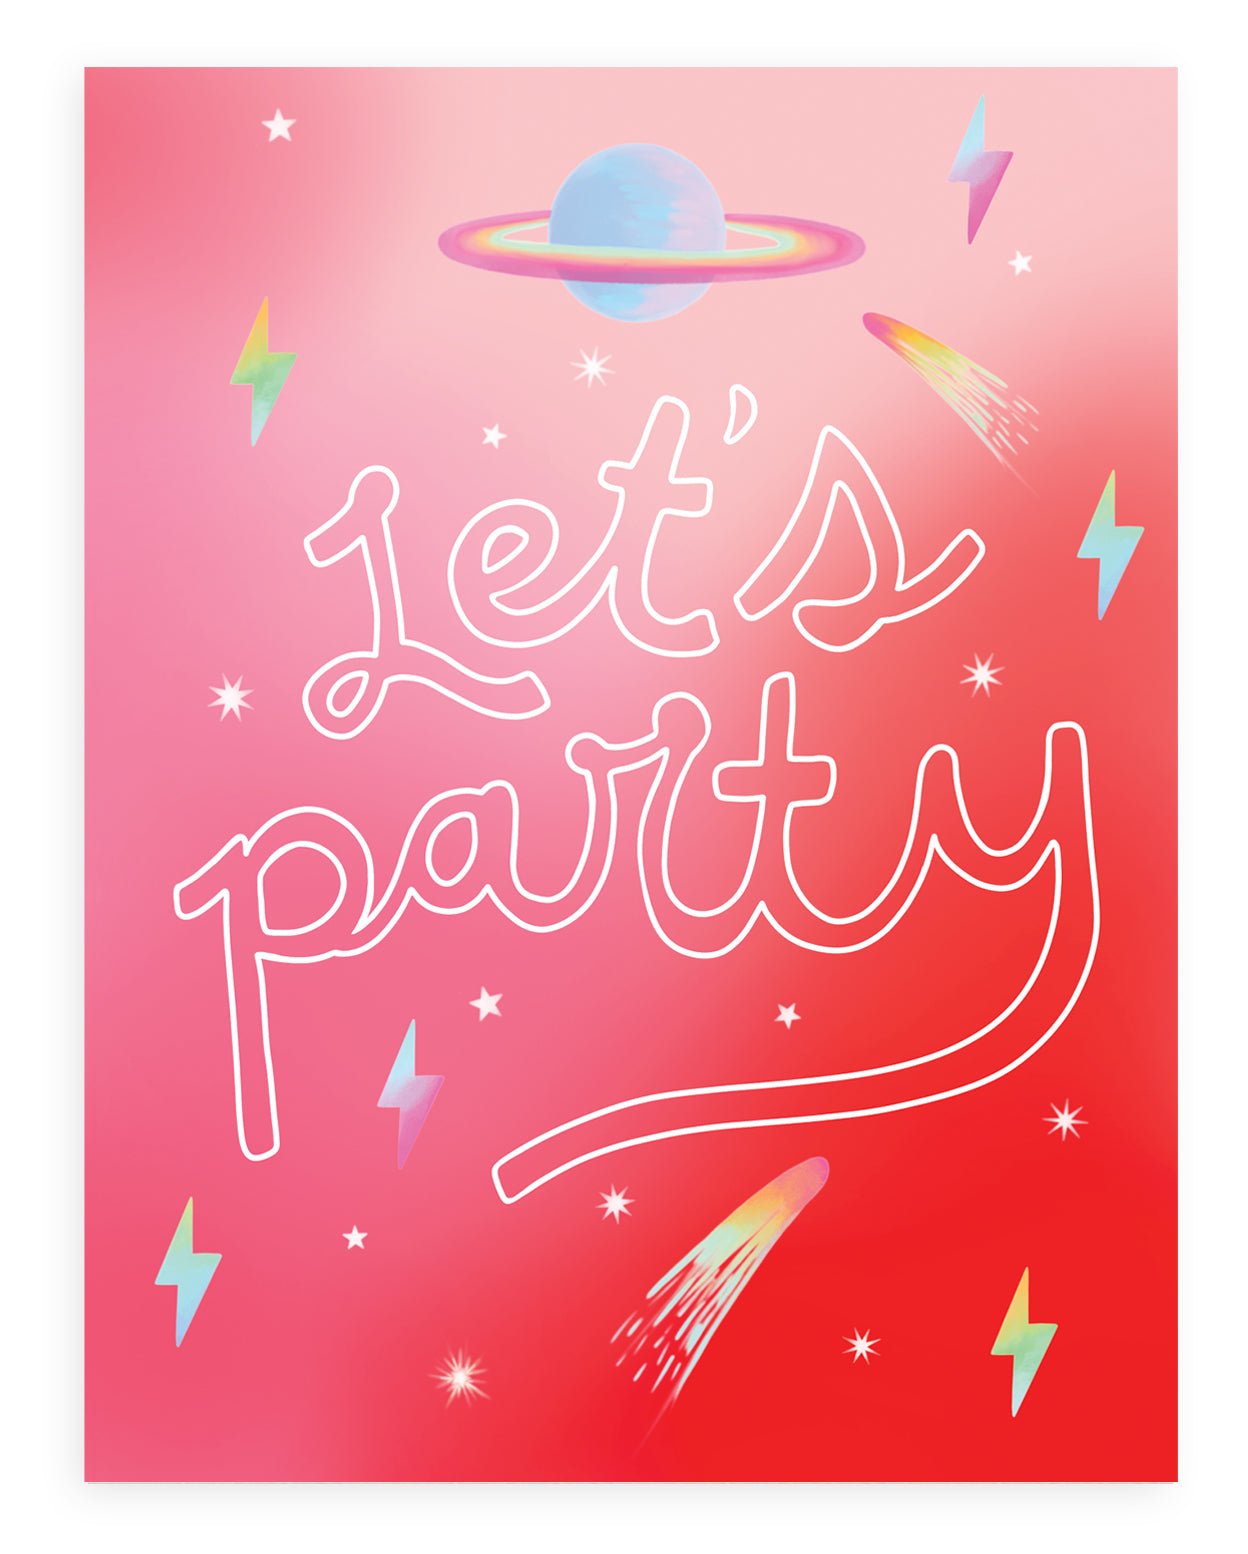 &quot;Let&#39;s Party&quot; printed in large cursive on an ombre red background with lightning bolts, still and shooting stars, and a blue Saturn design on a white background.